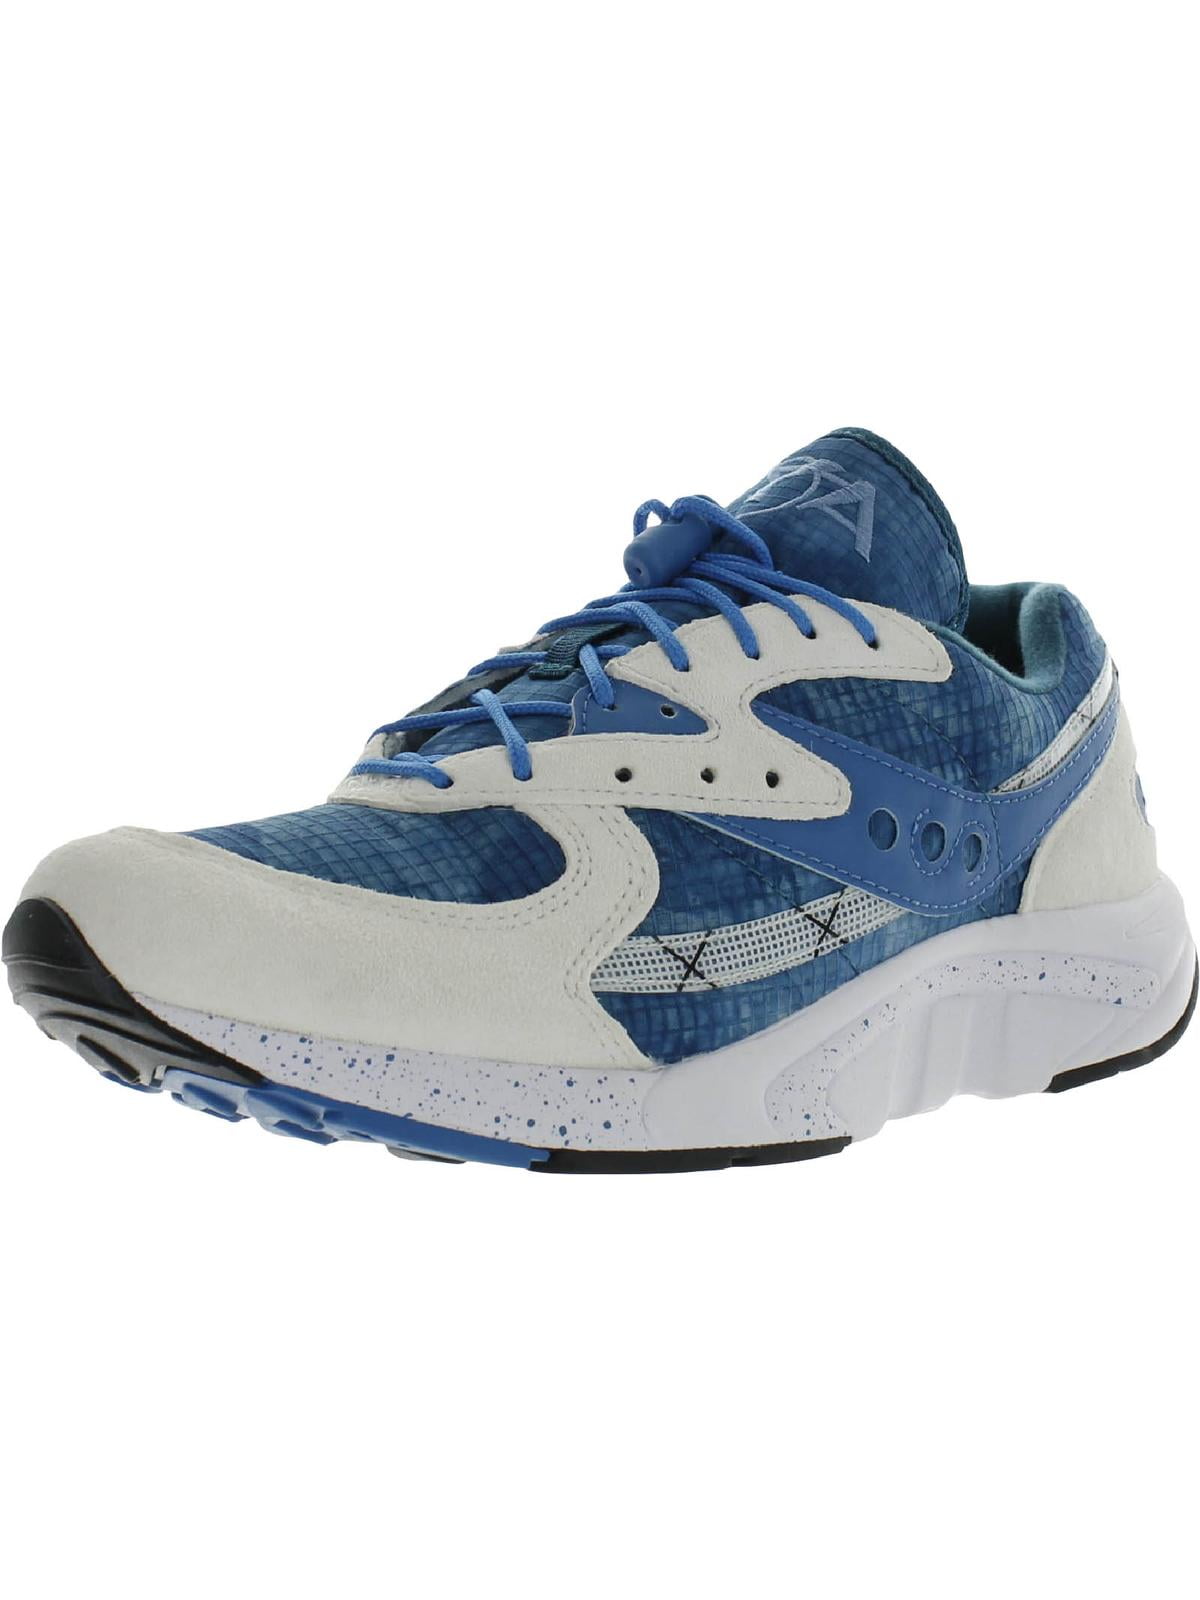 Saucony Mens Aya Lifestyle Cross Training Running Shoes Sneakers BHFO 5542 